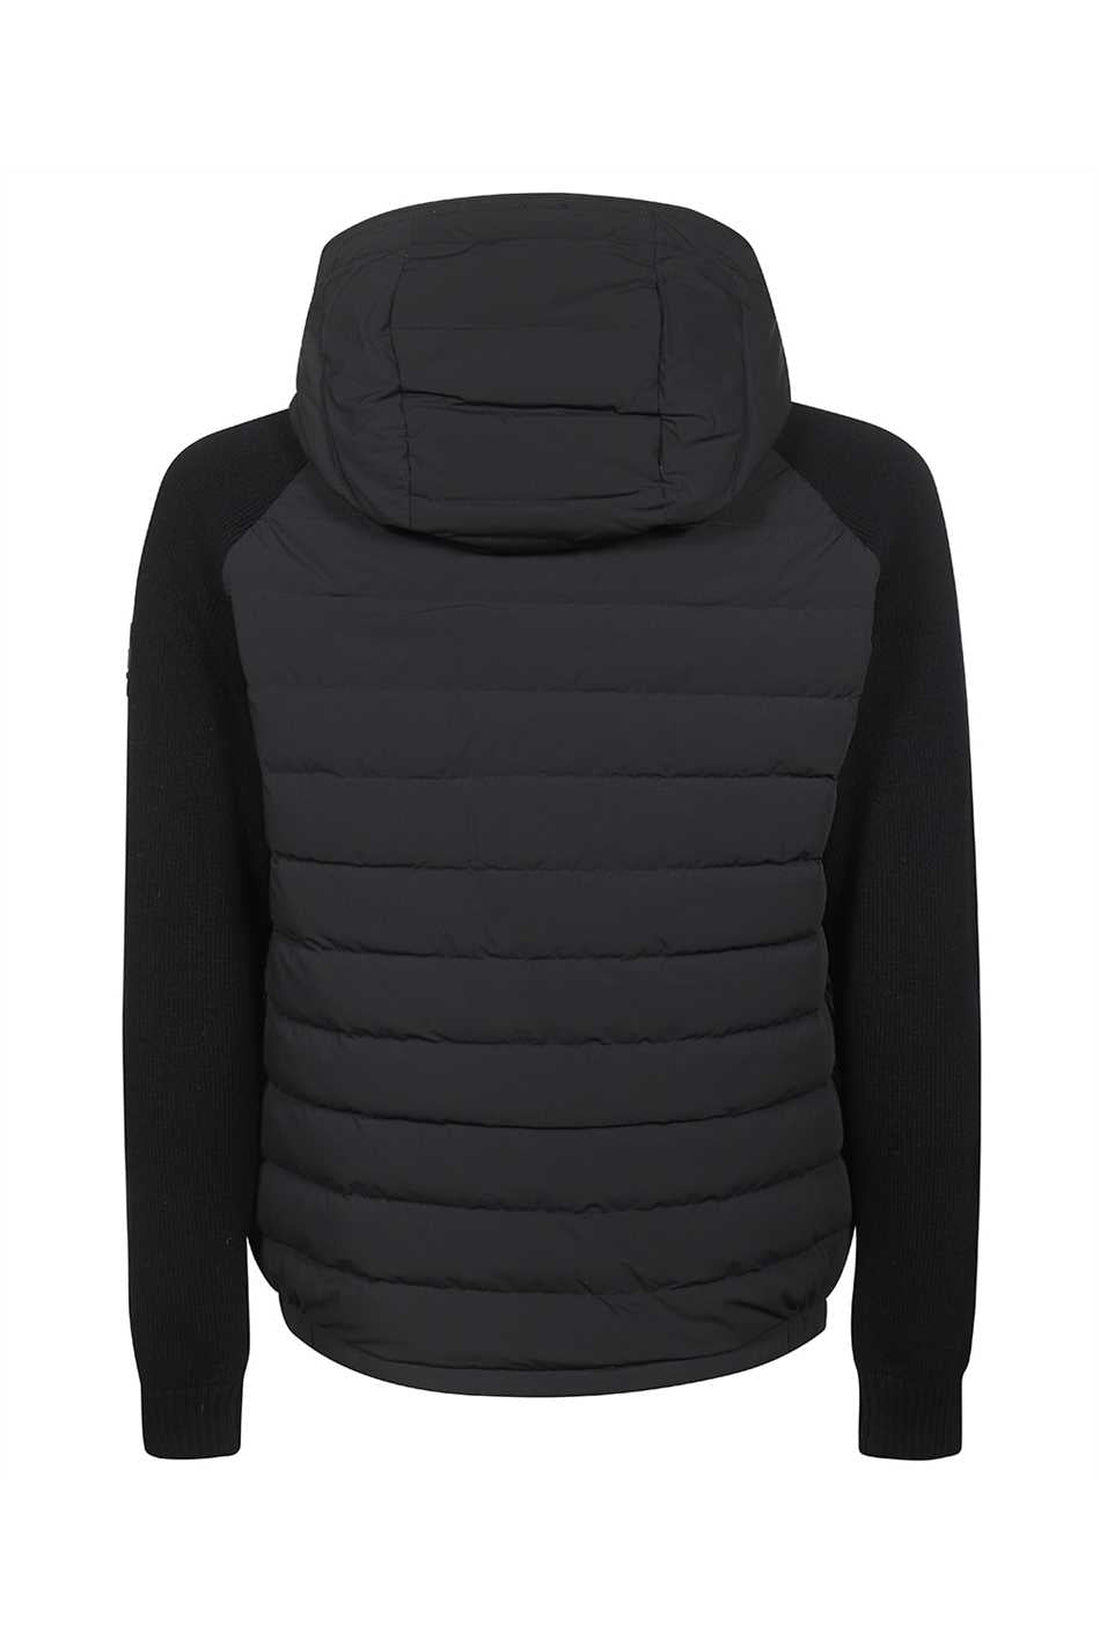 Woolrich-OUTLET-SALE-Knitted sleeves padded jacket-ARCHIVIST